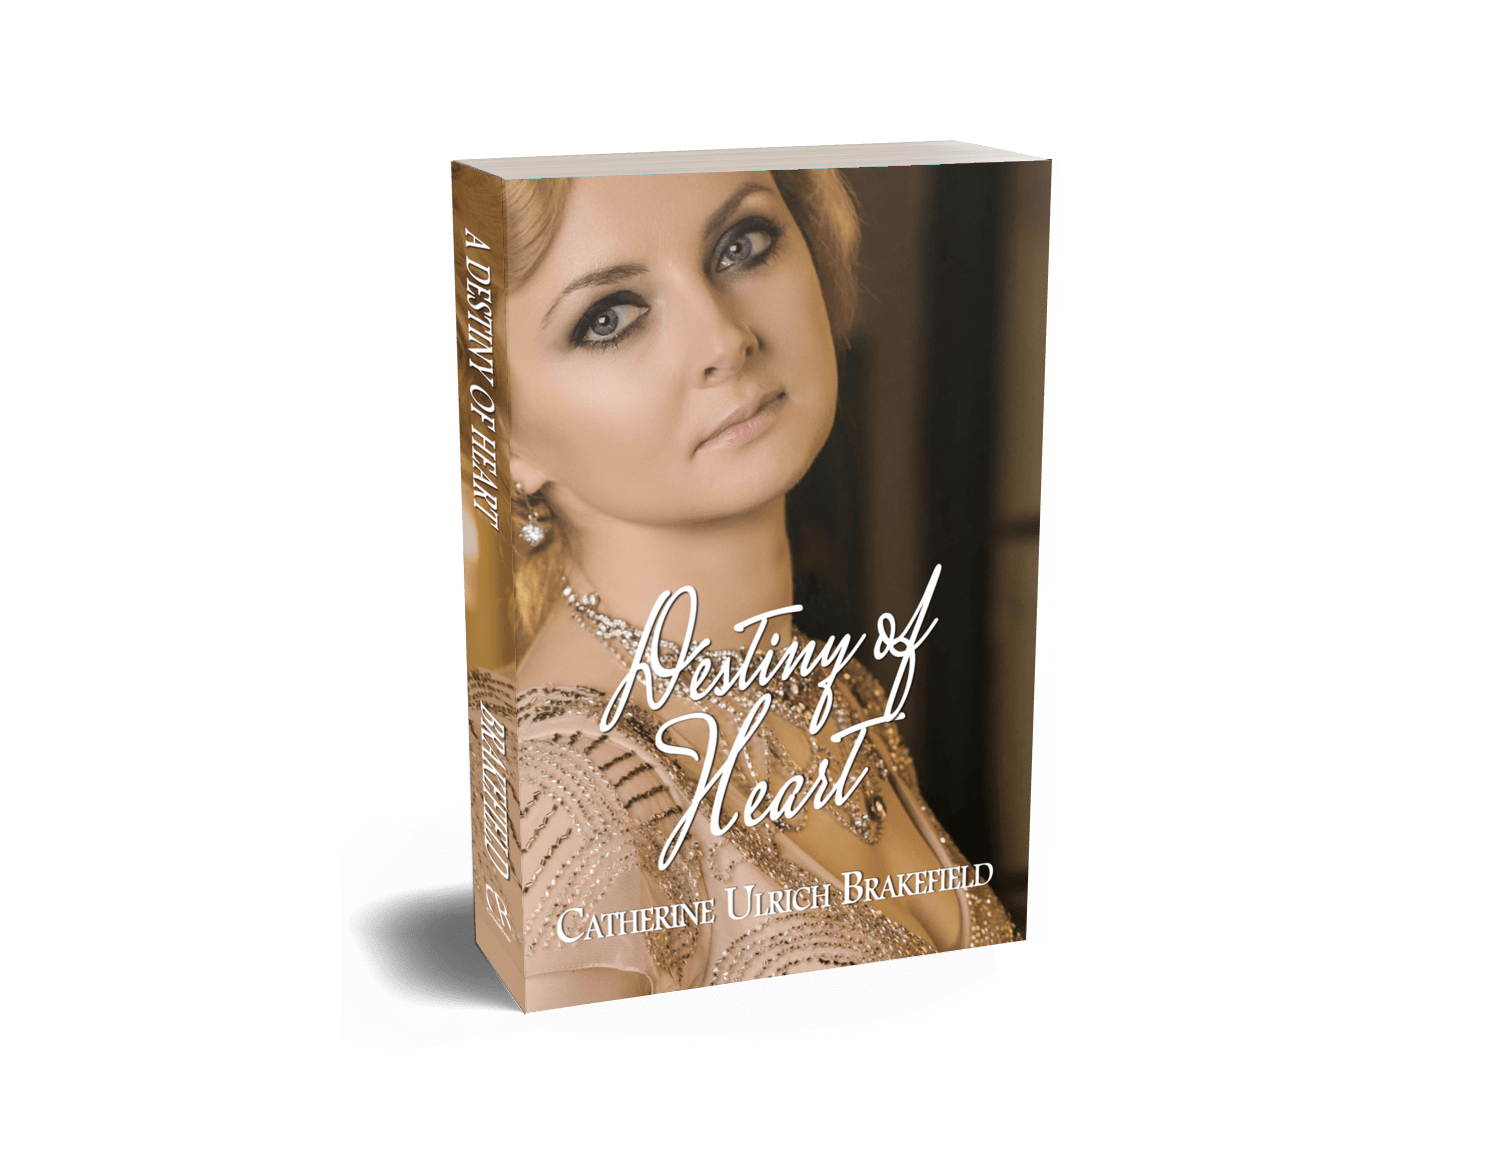 Destiny of Heart by Catherine Ulrich Brakefield from Christian publisher CrossRiver Media